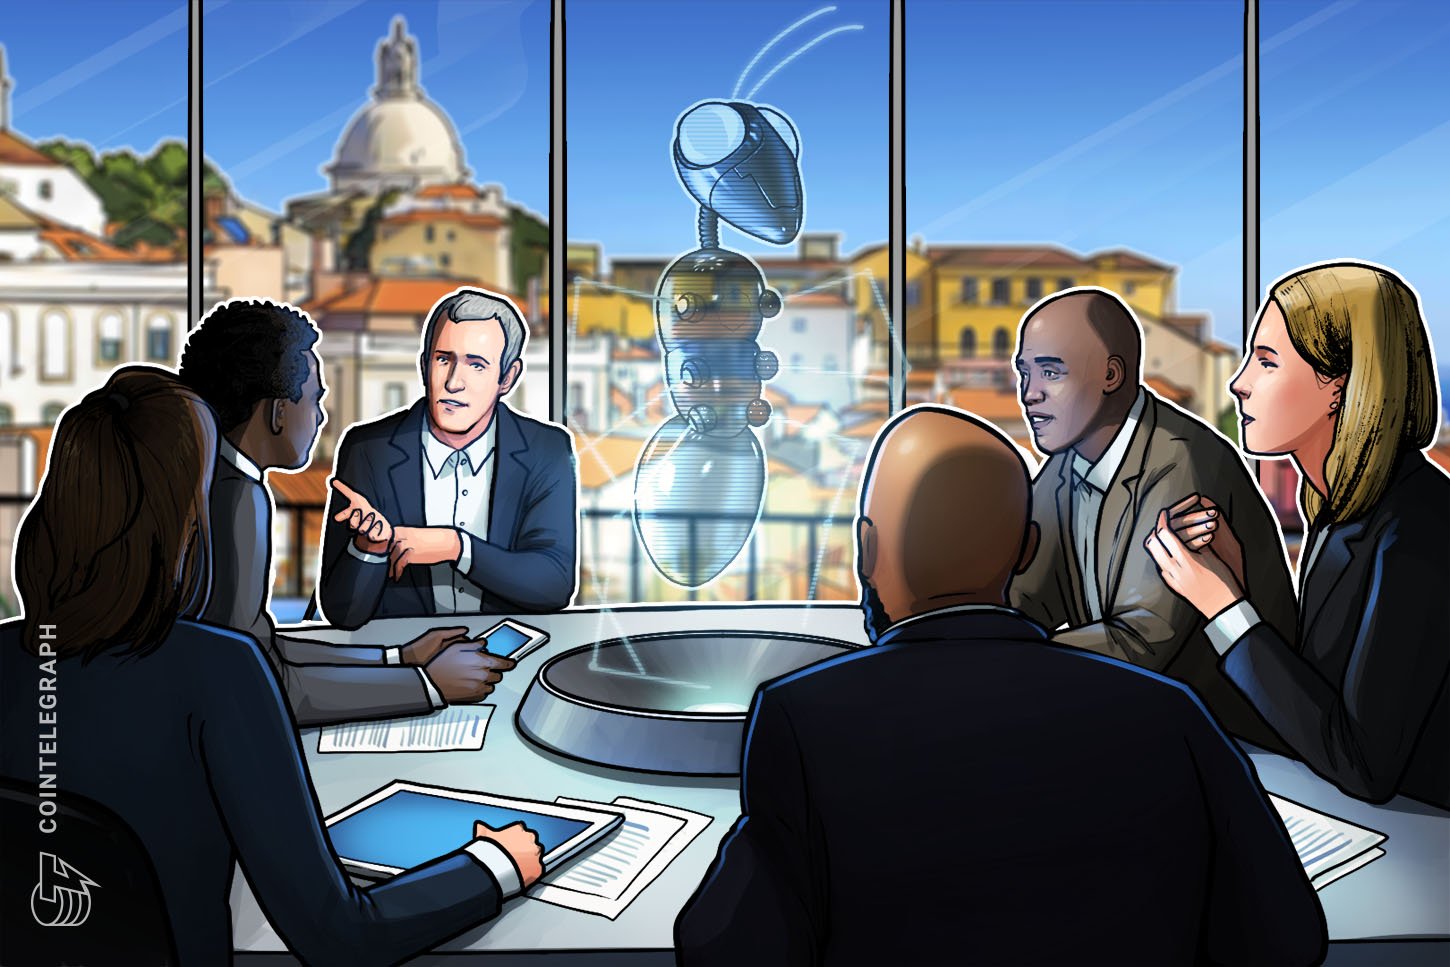 Portugal Chases Crypto-Pleasant Standing With New ‘Free Zones’ for Tech